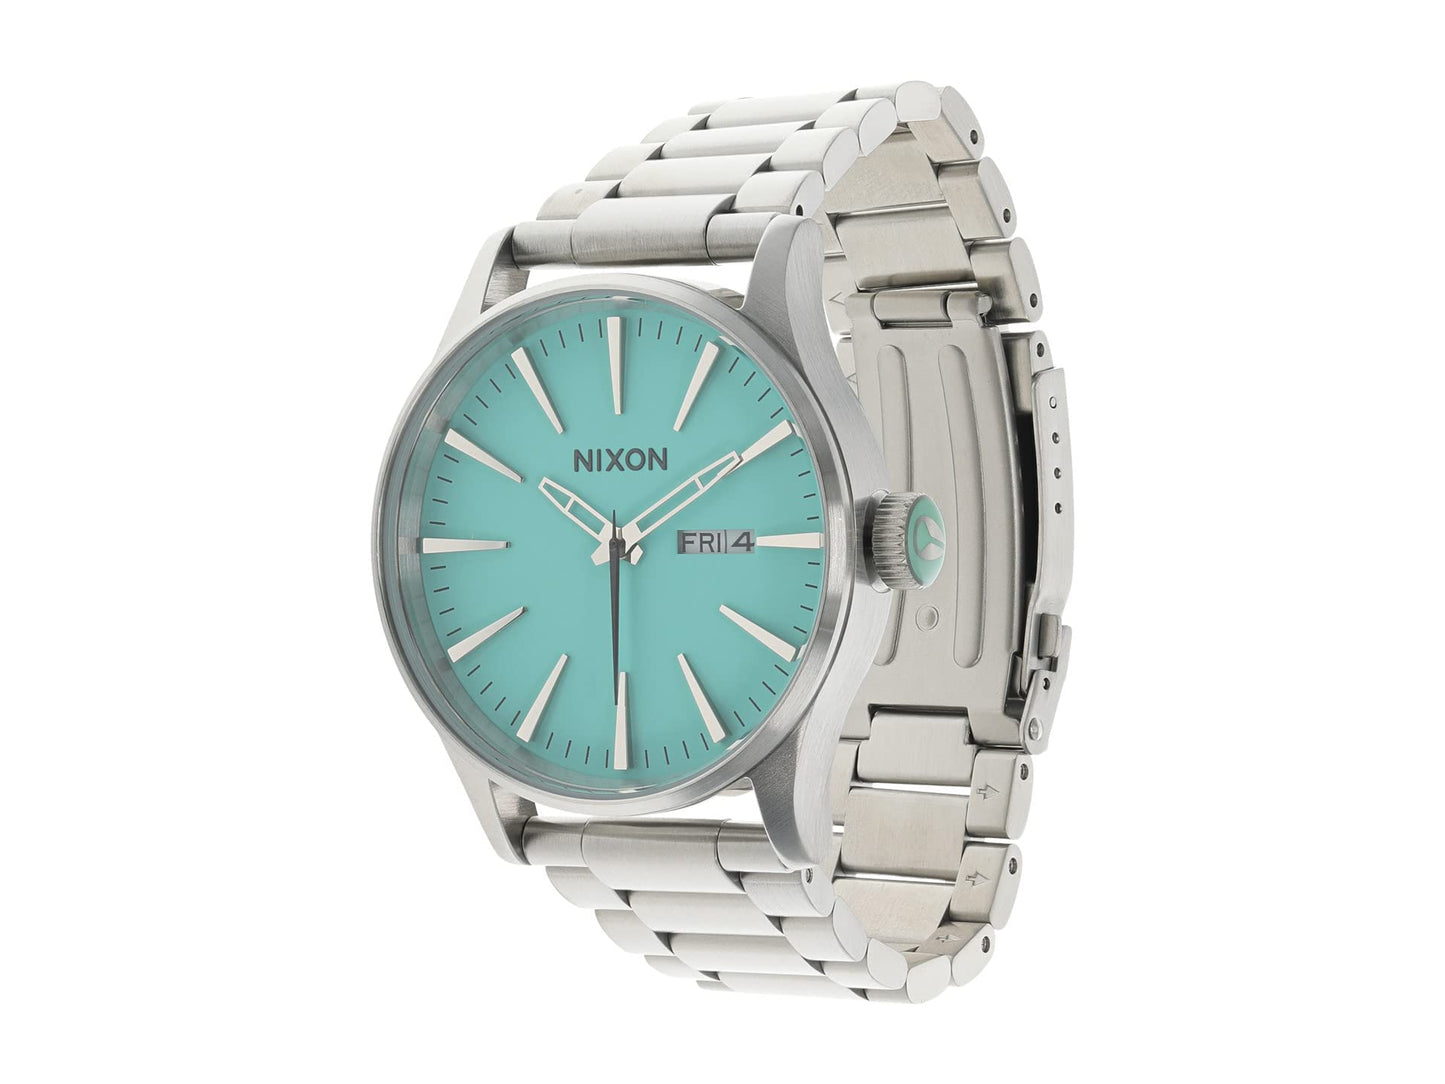 NIXON Sentry SS A356 - Silver/Turquoise - 100m Water Resistant Men's Analog Classic Watch (42mm Watch Face, 23mm-20mm Stainless Steel Band)